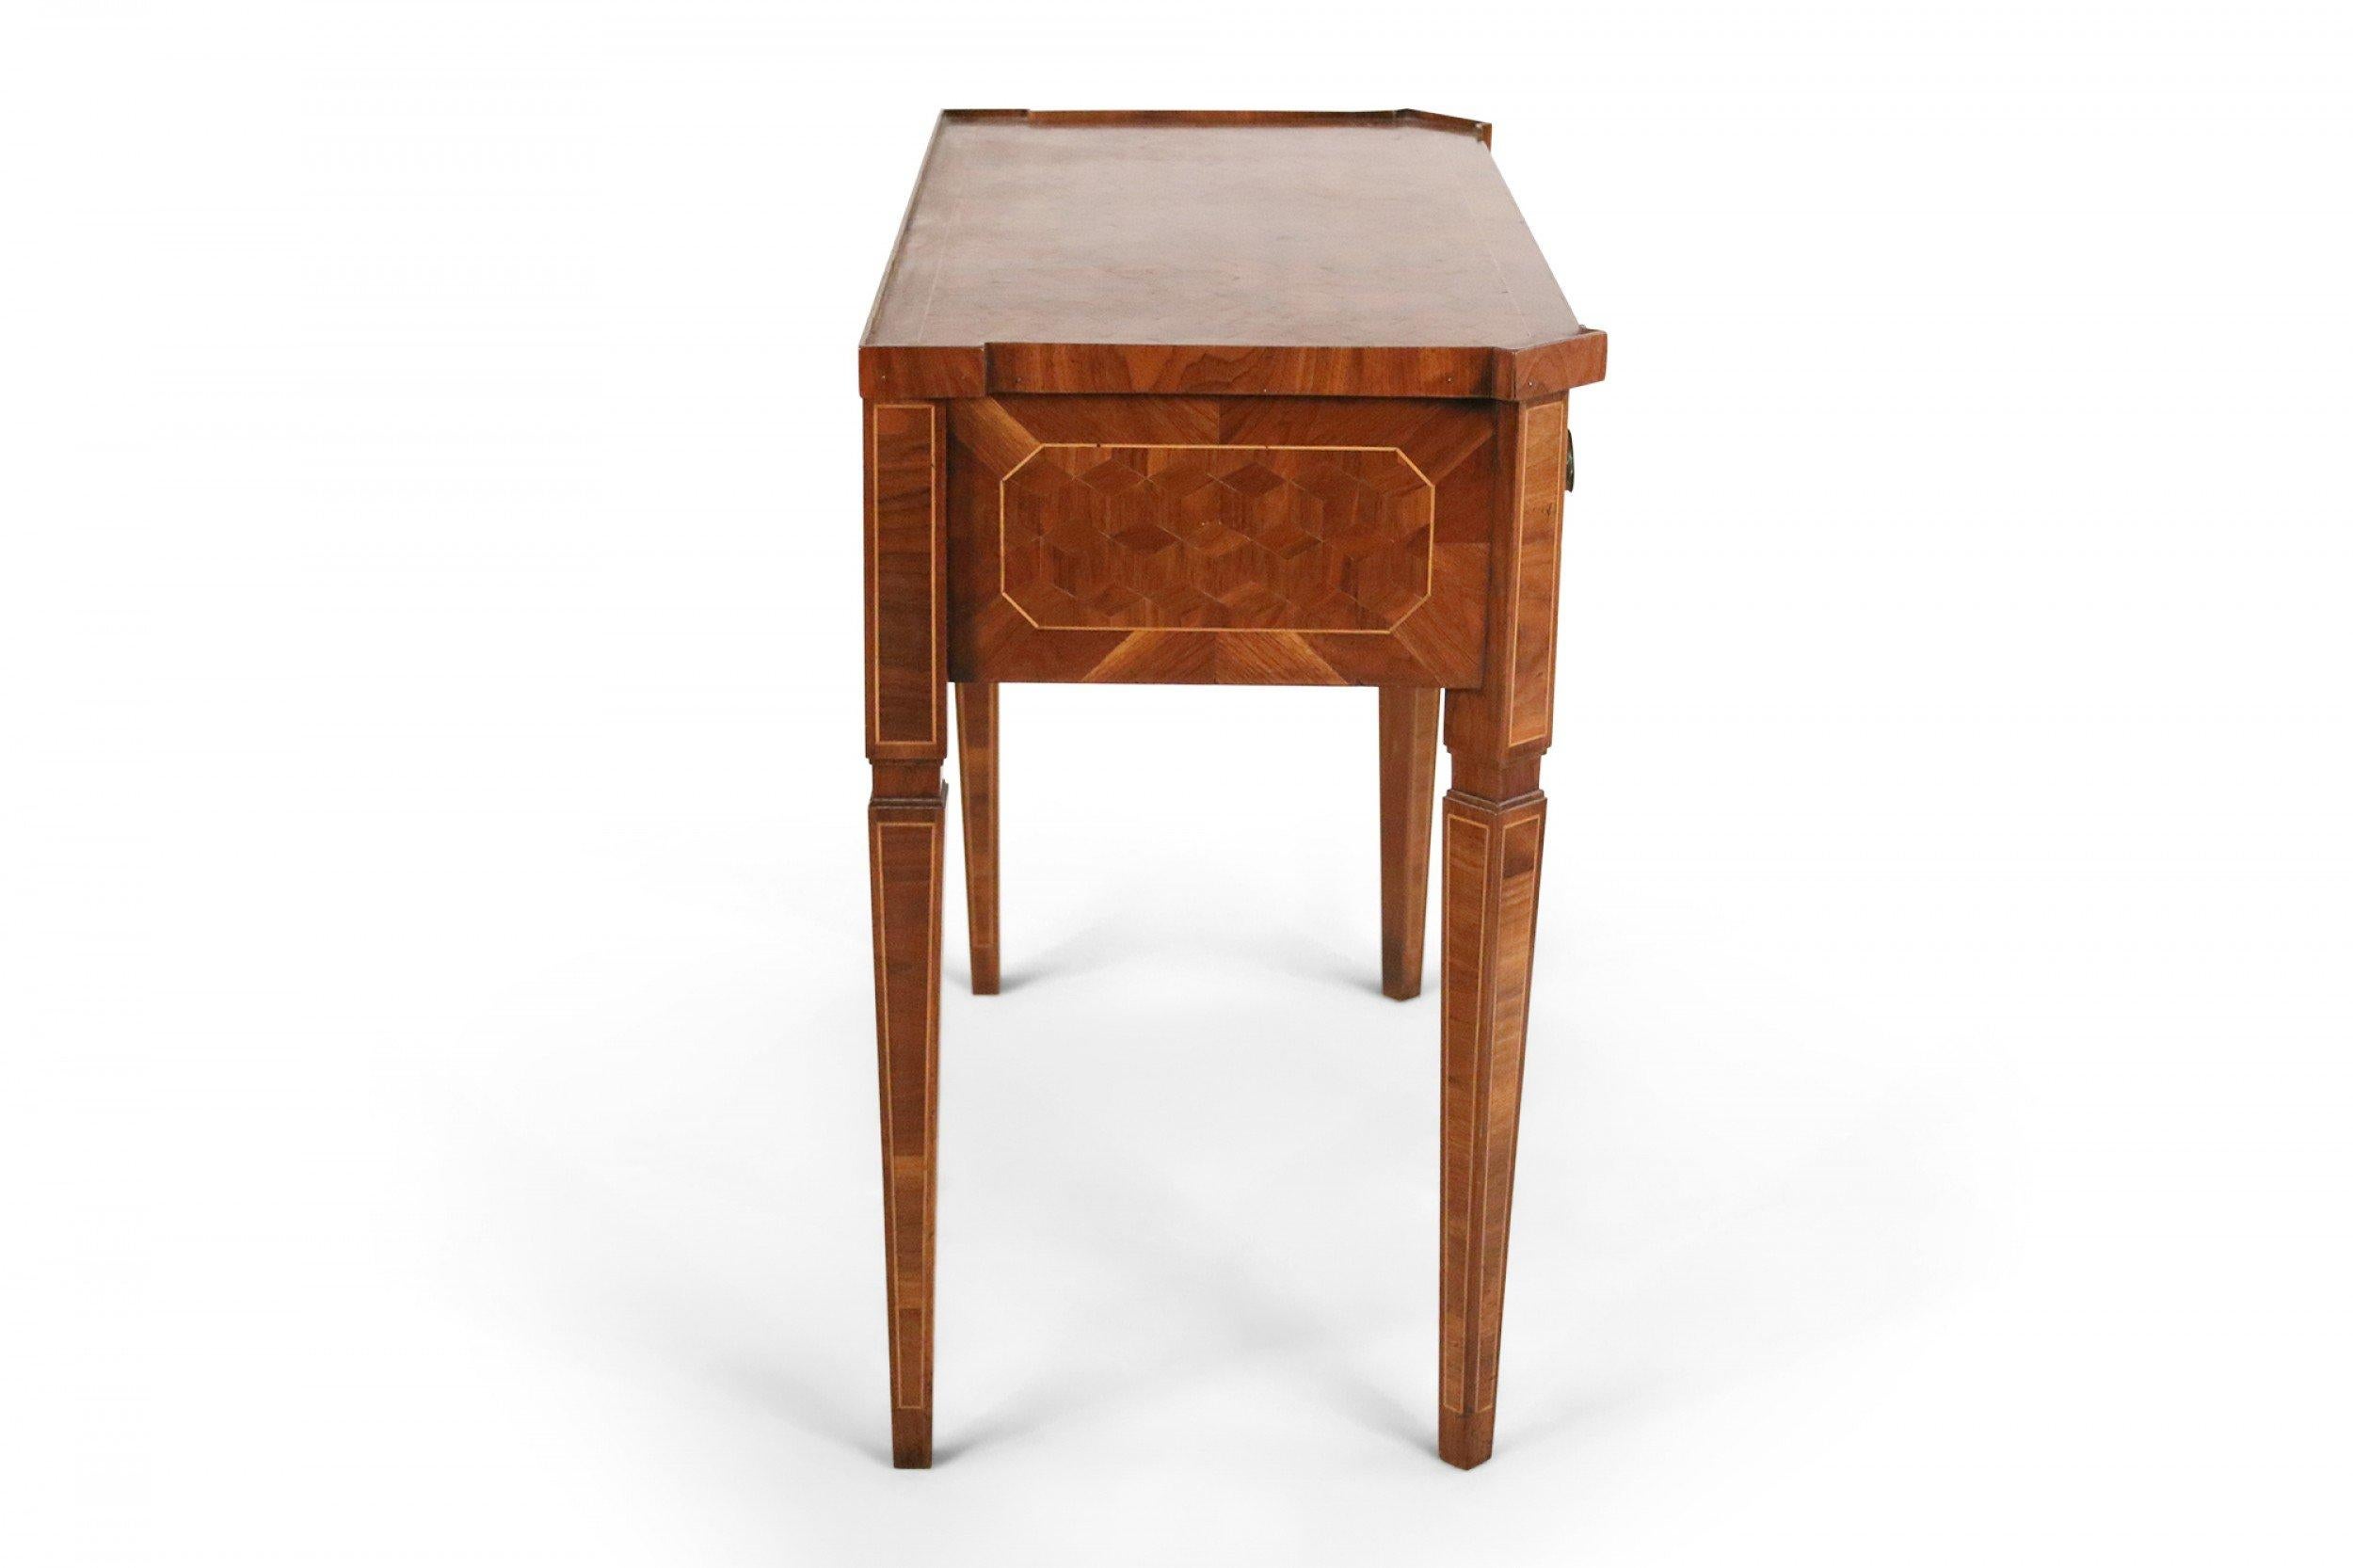 19th Century Continental German Mahogany Parquetry Veneer Console Table For Sale